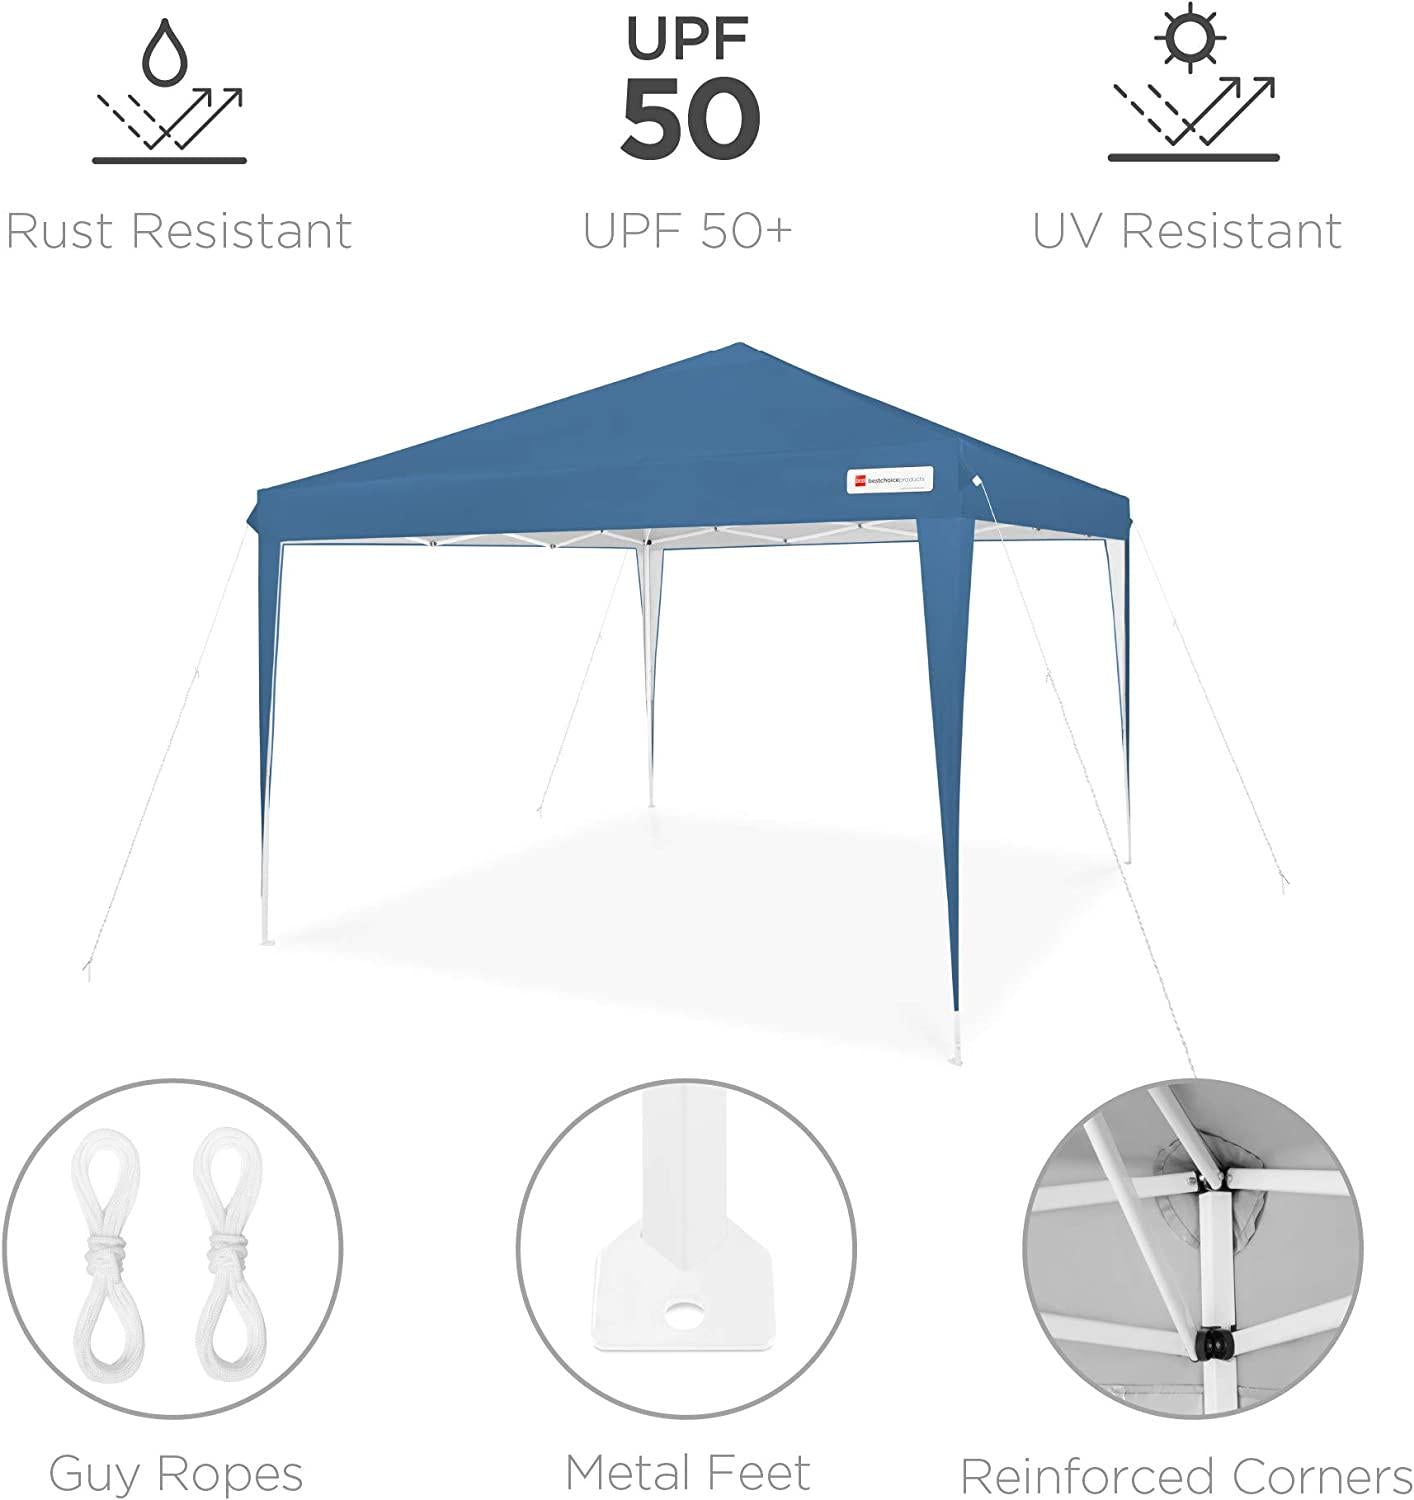 Best Choice Products 10x10ft Pop Up Canopy Outdoor Portable Folding Instant Lightweight Gazebo Shade Tent w/Adjustable Height, Wind Vent, Carrying Bag - Blue